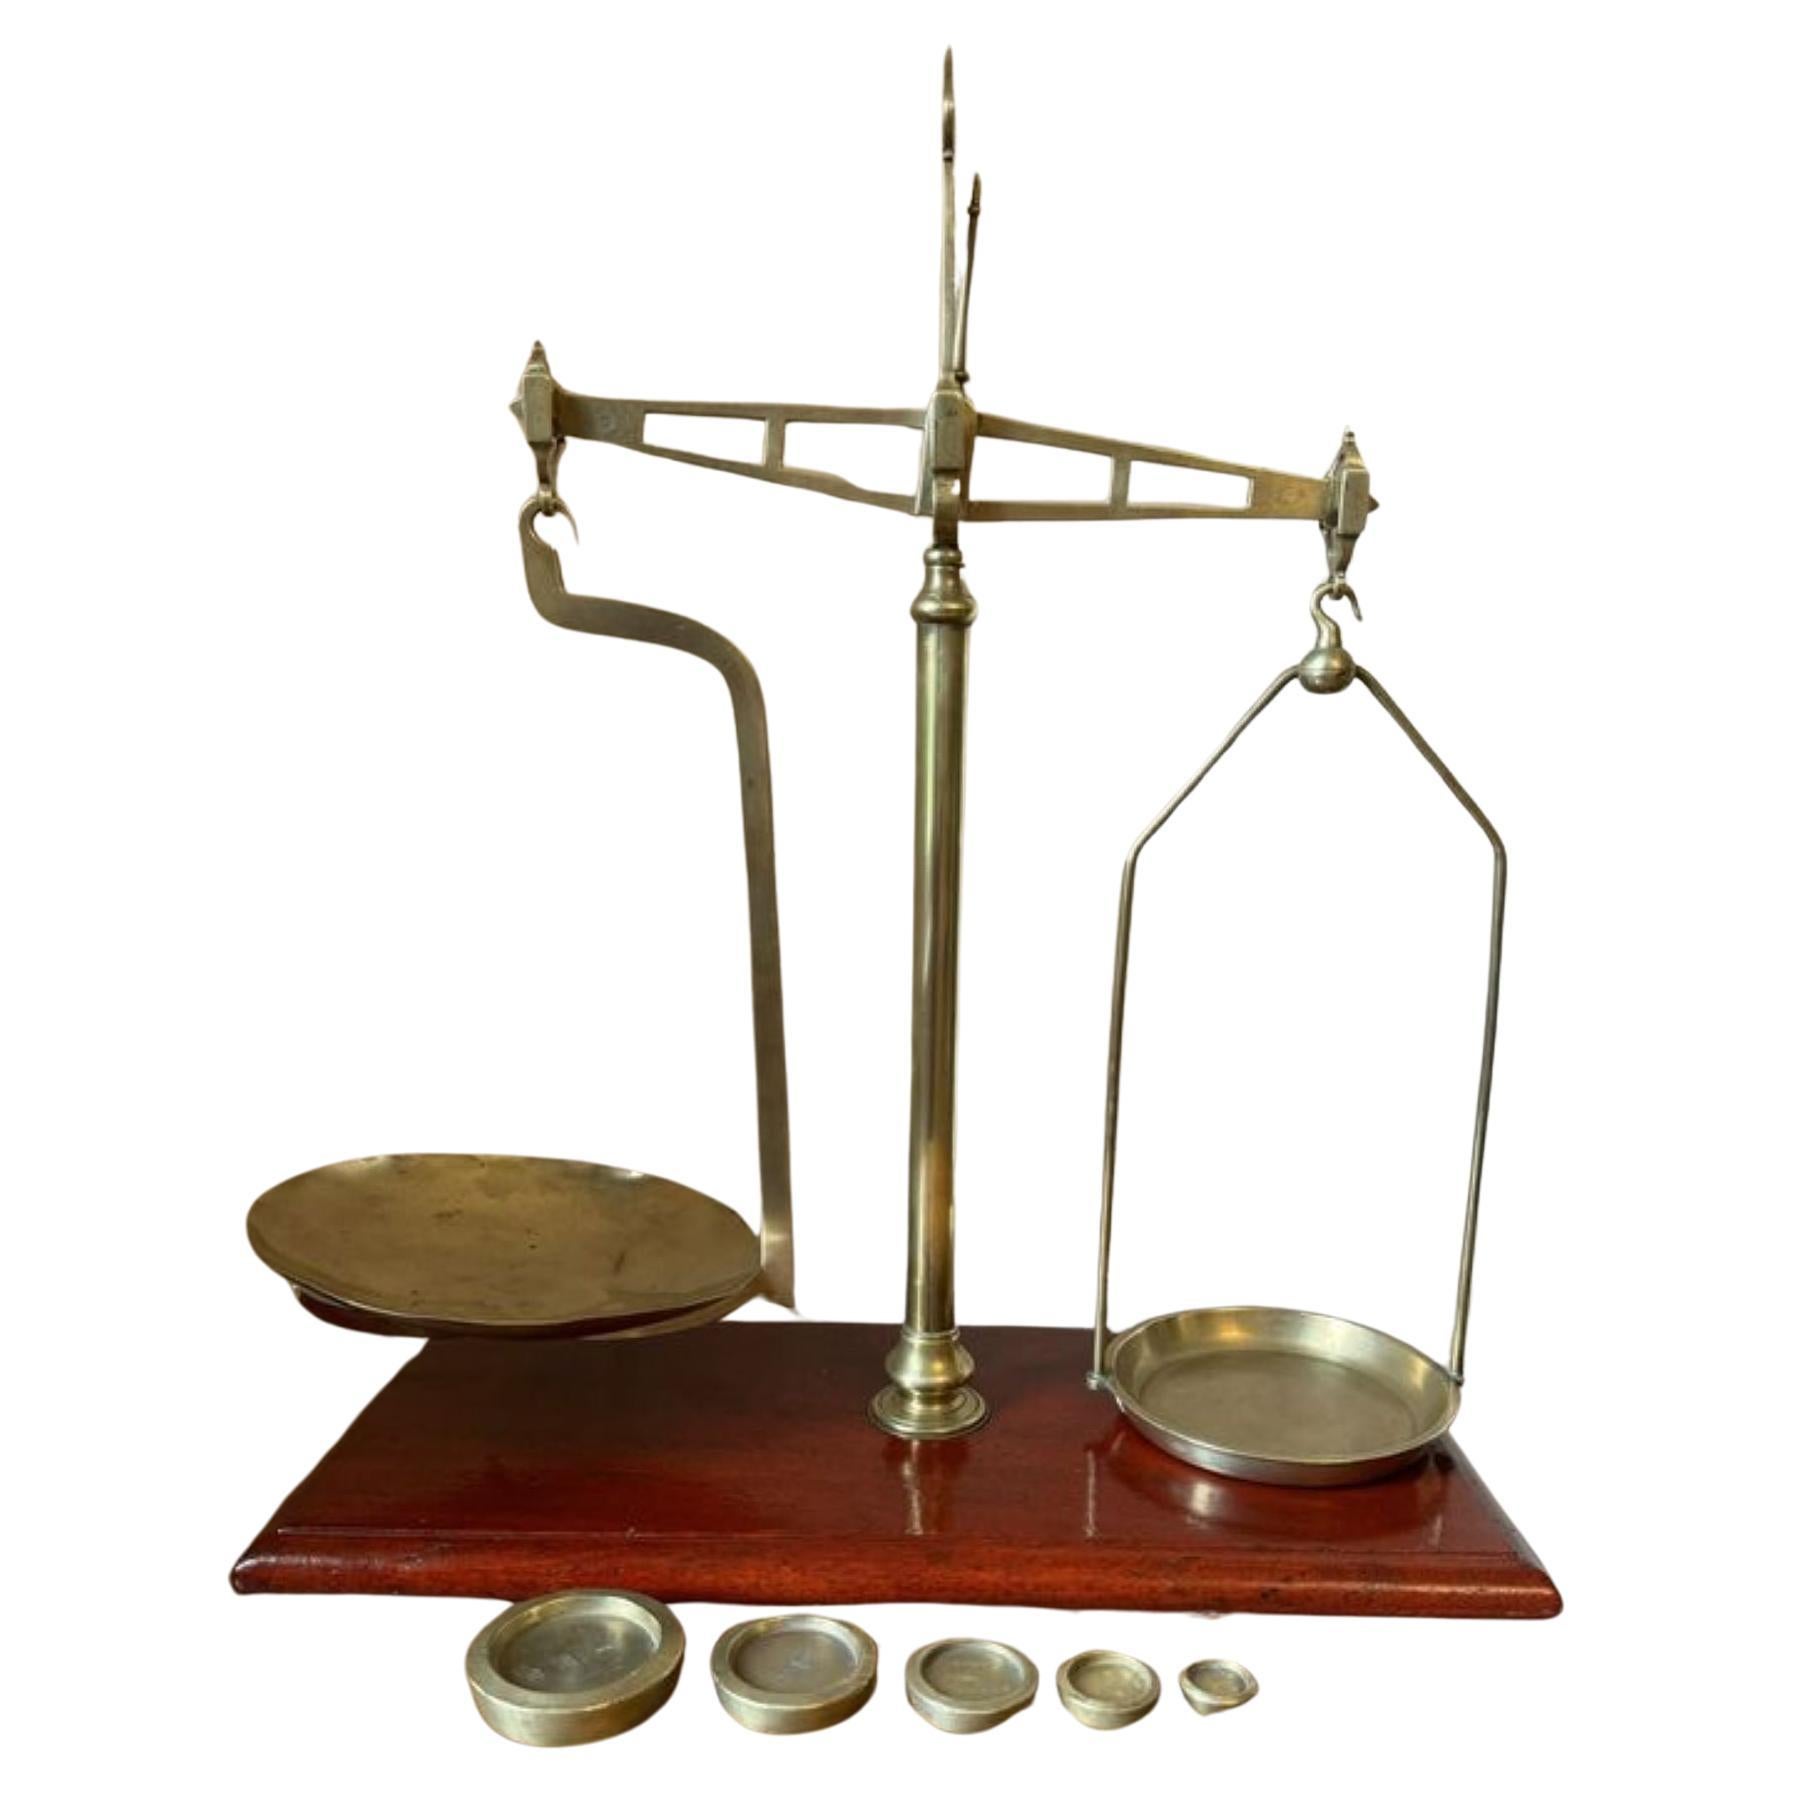 Quality large pair of antique Victorian scales by Parnall & Sons of Bristol